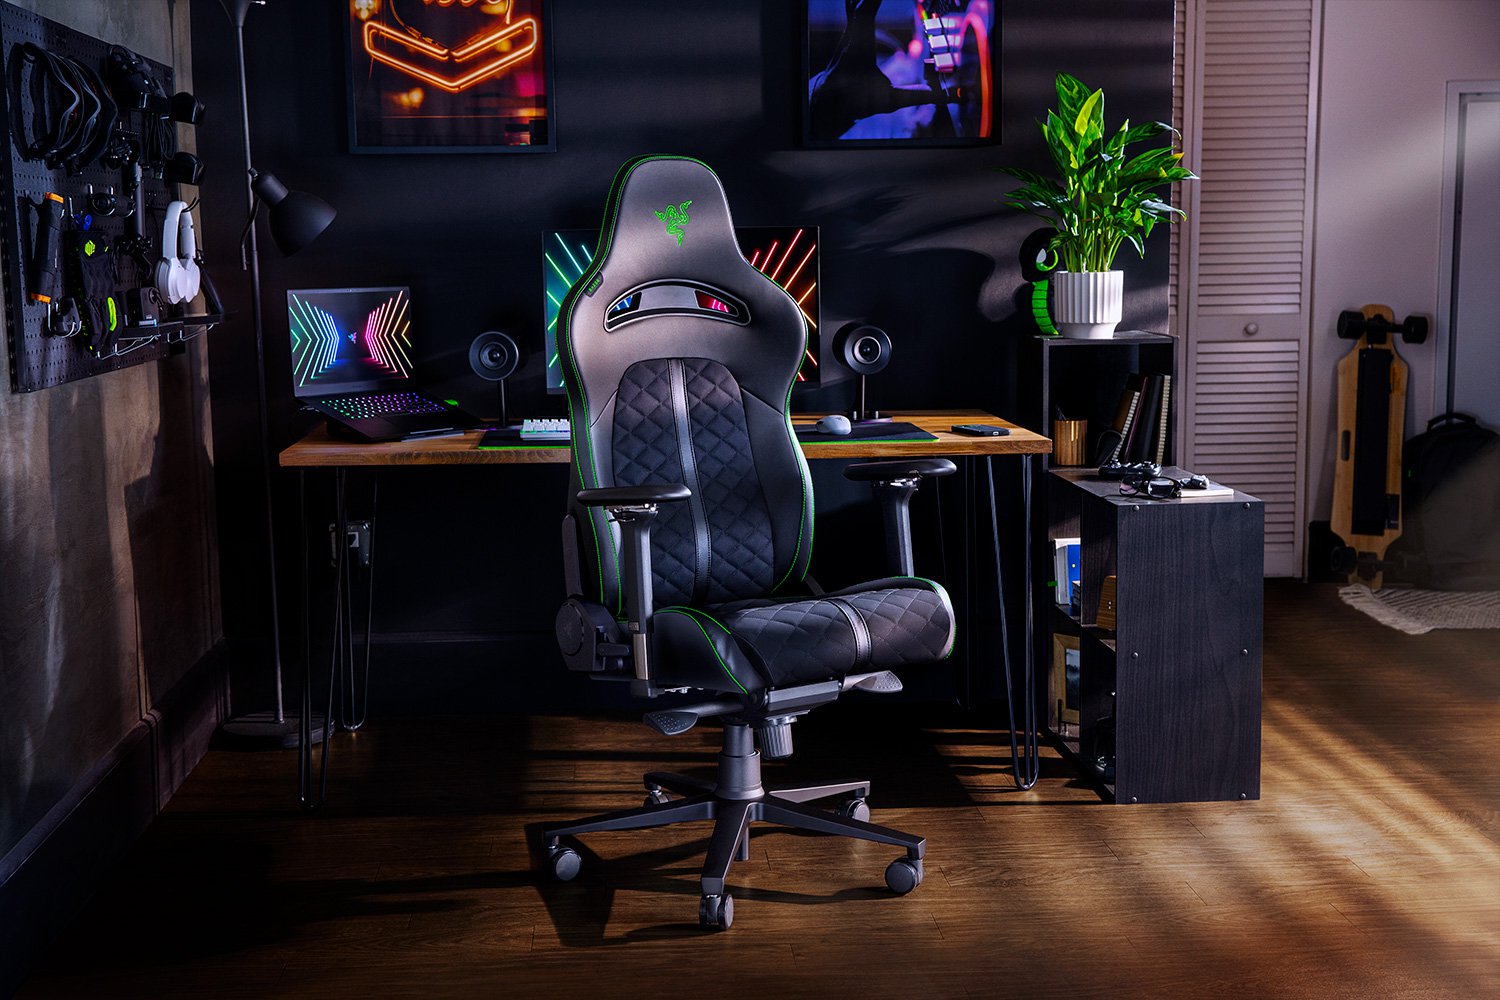 Best gaming chair deals: Save on Alienware, Razer, and more